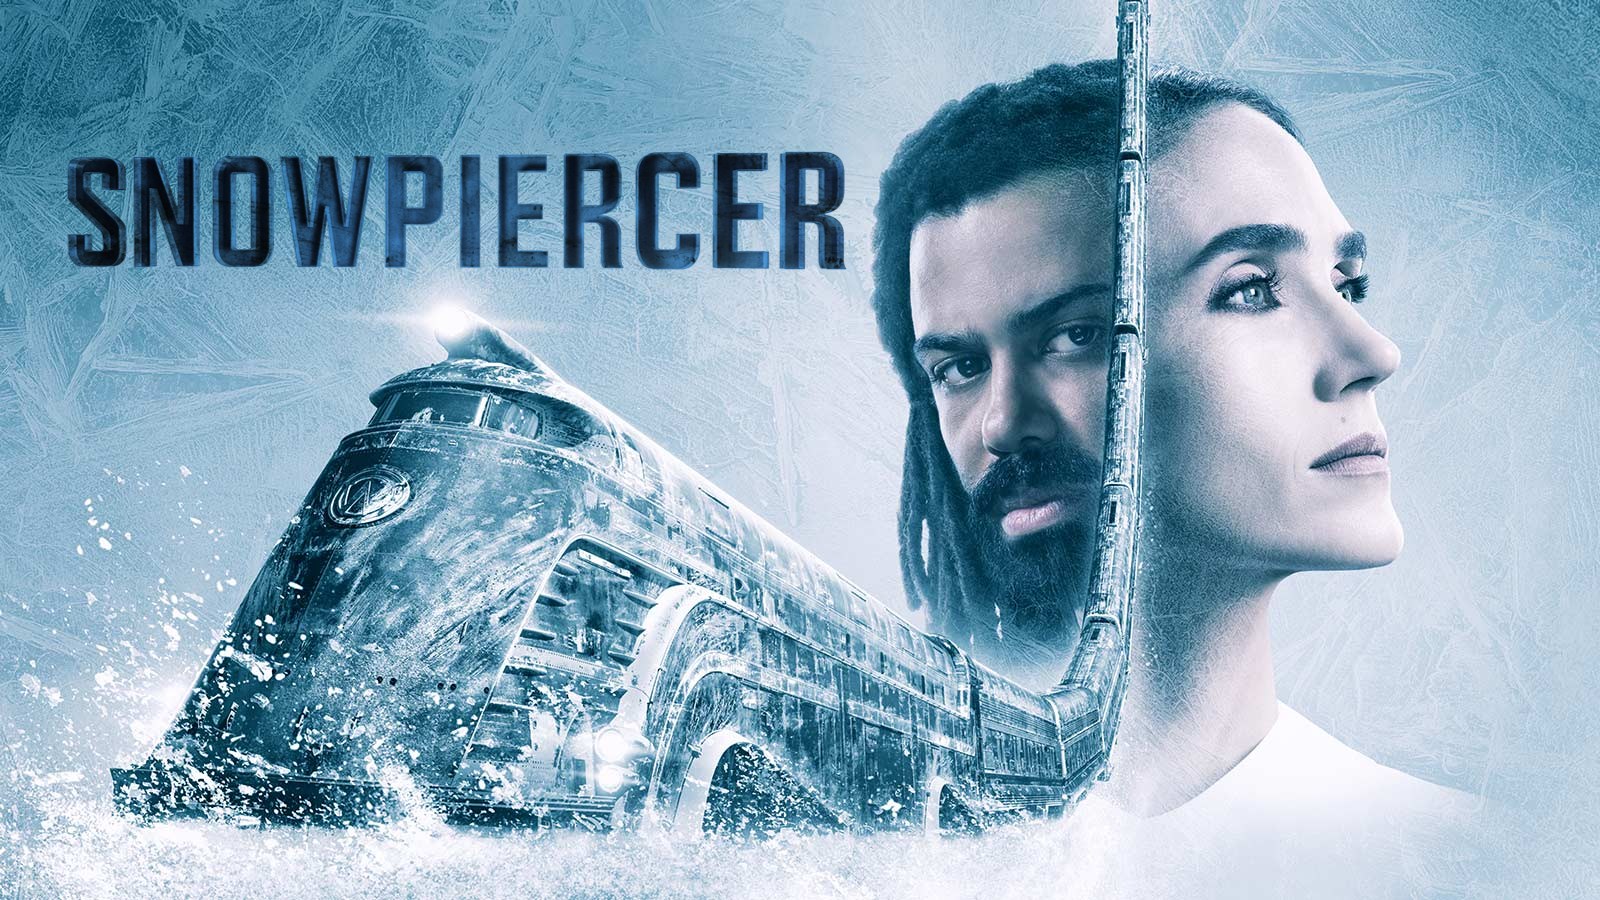 Art of the Cut podcast with two of the editors of the TNT show Snowpiercer